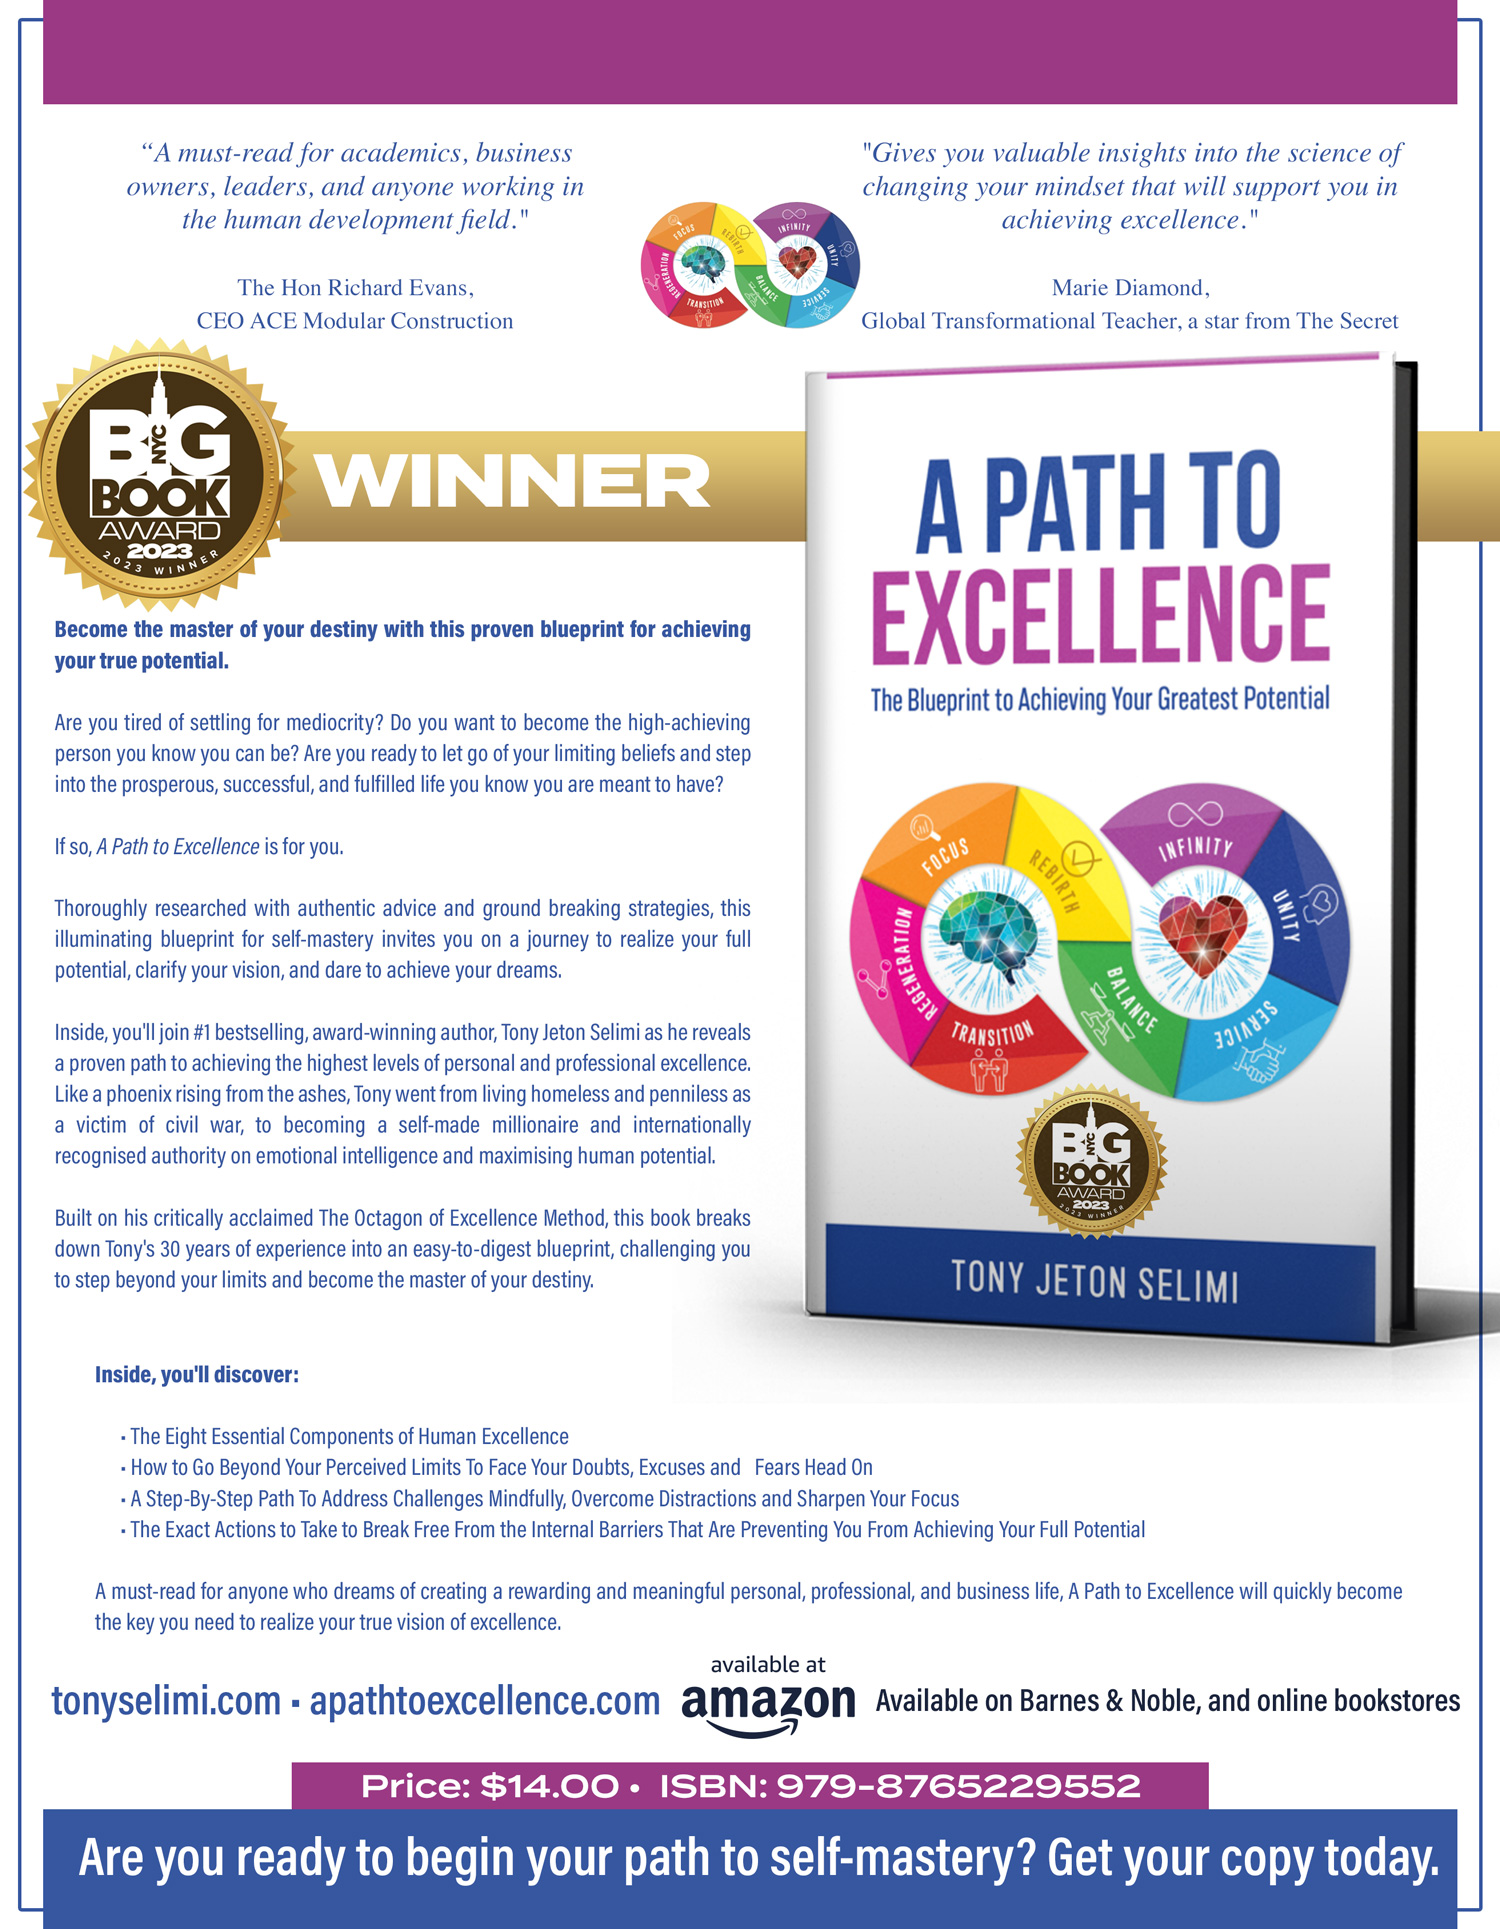 A Path to Excellence Book by Tony Jeton Selimi NYC Big Book Award Winner